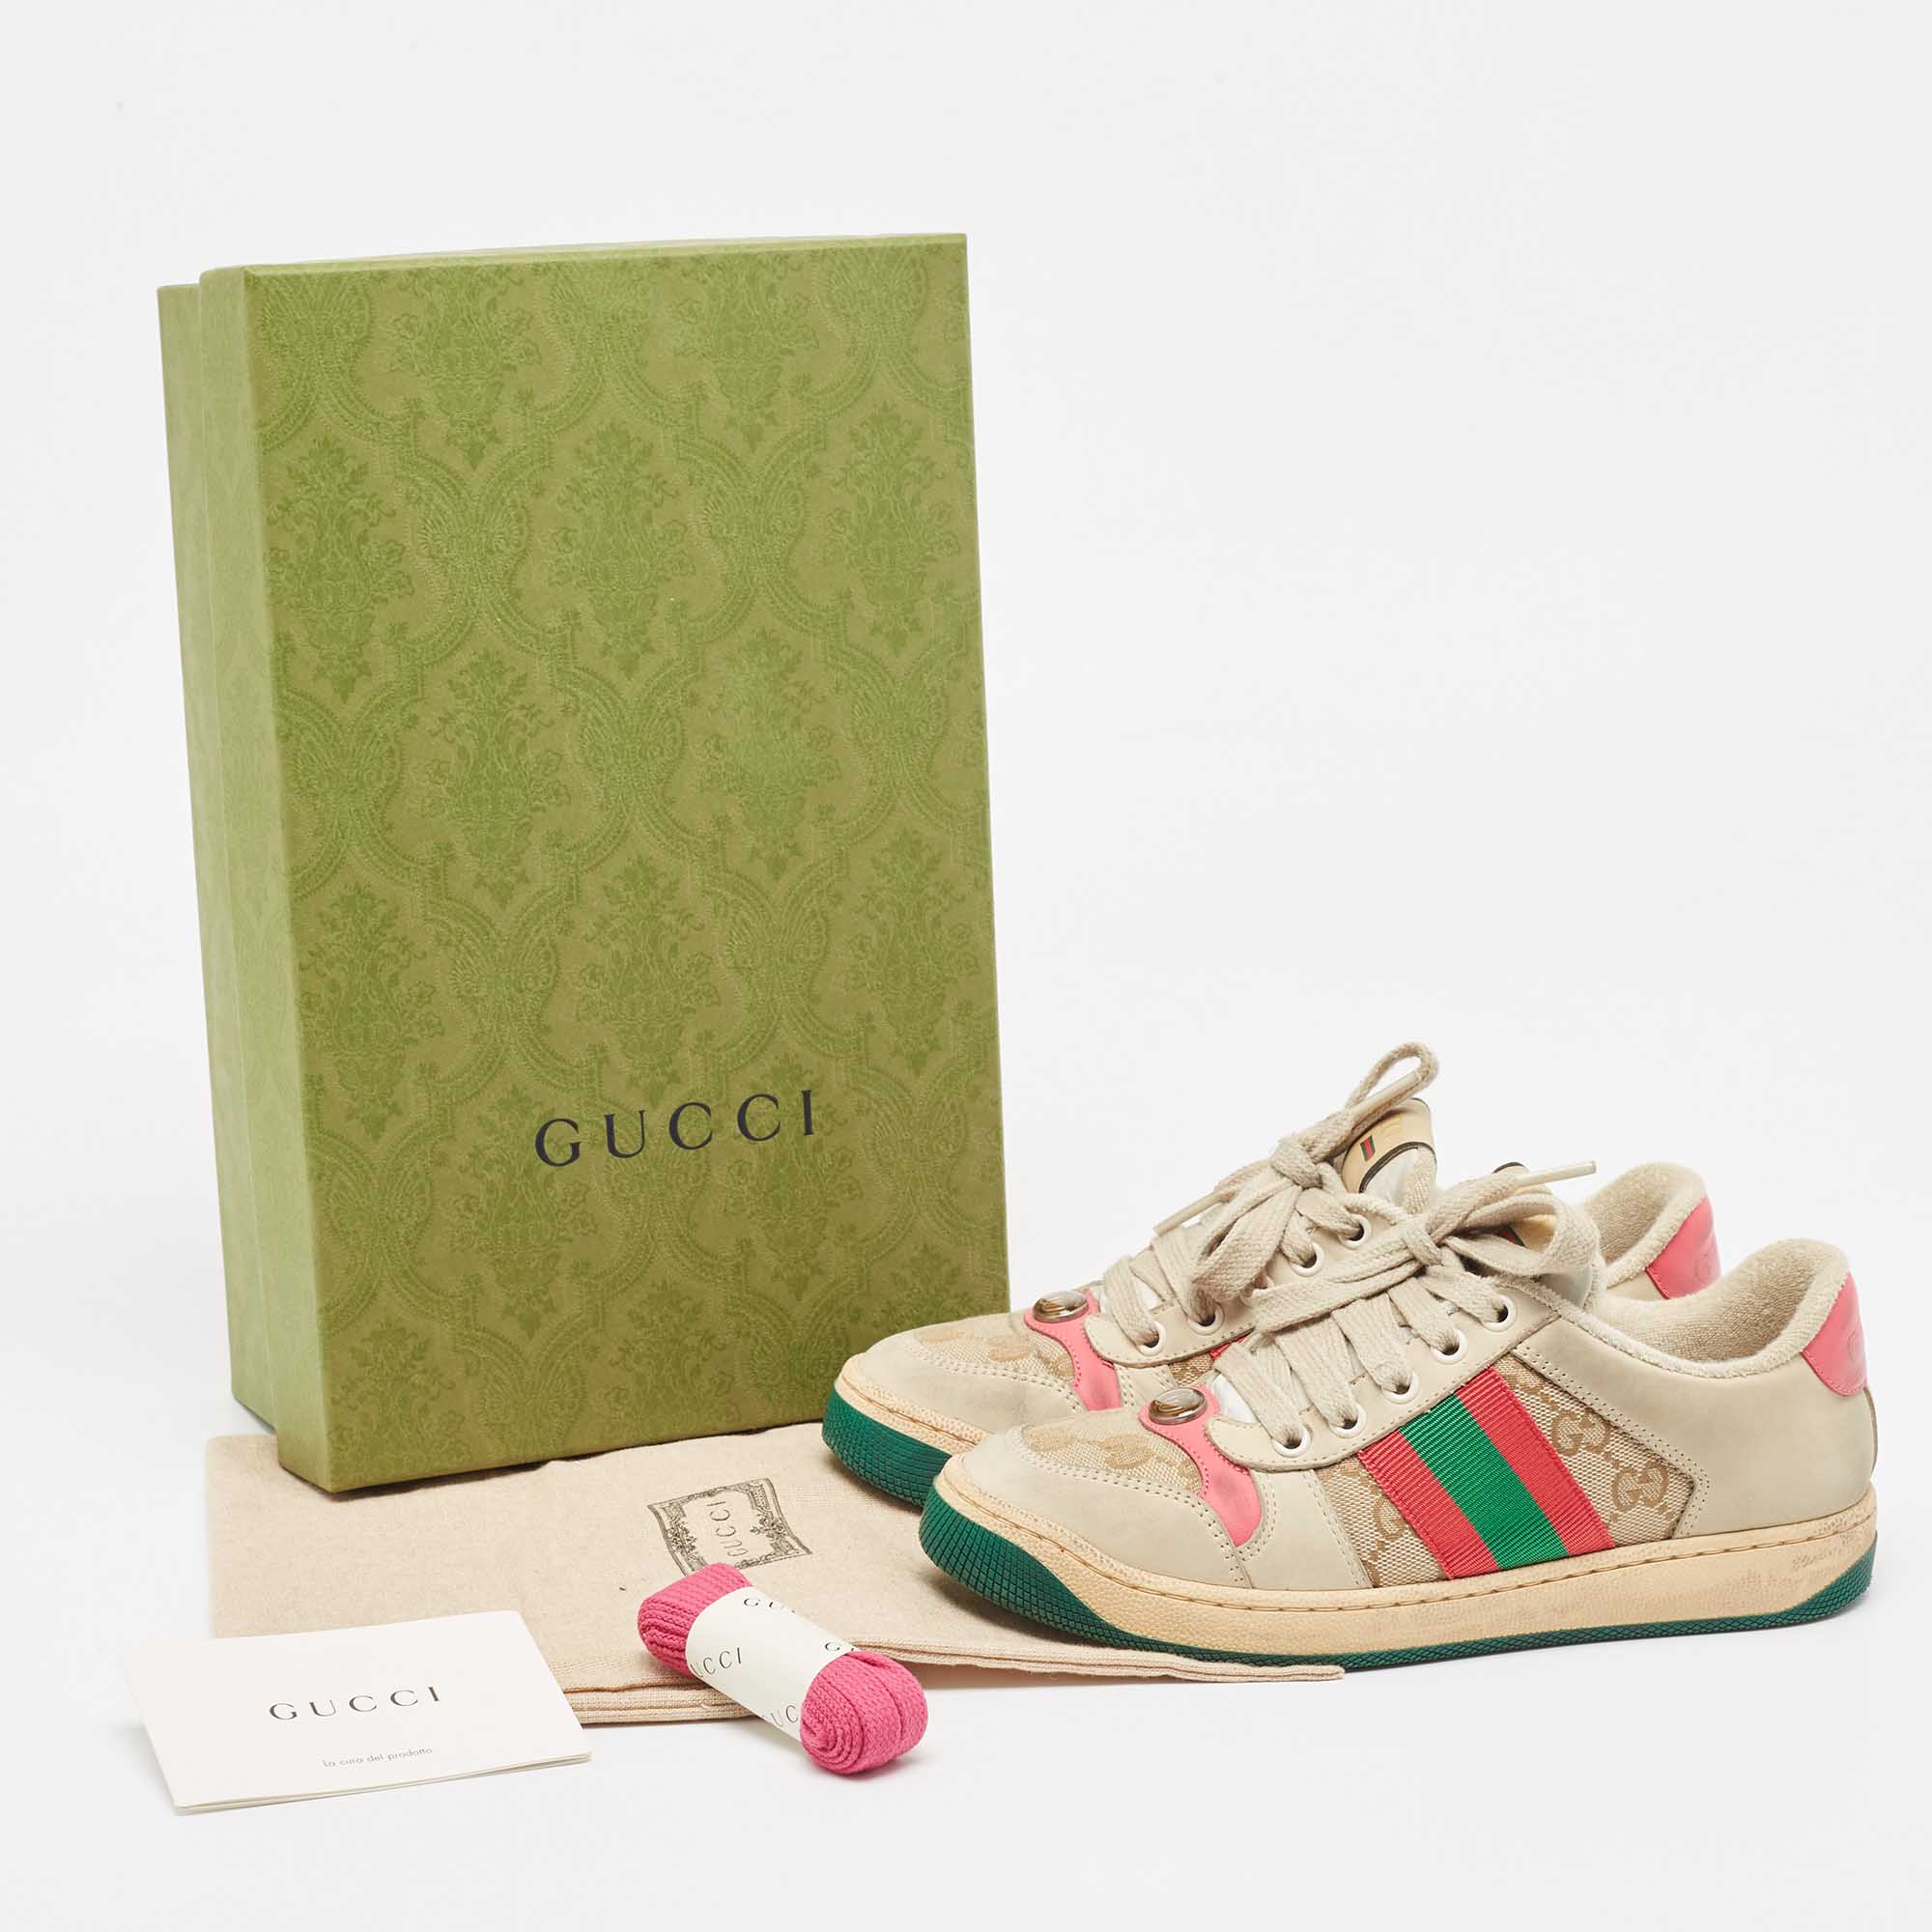 Gucci Grey/Pink Nubuck Leather Screener Sneakers Size 34